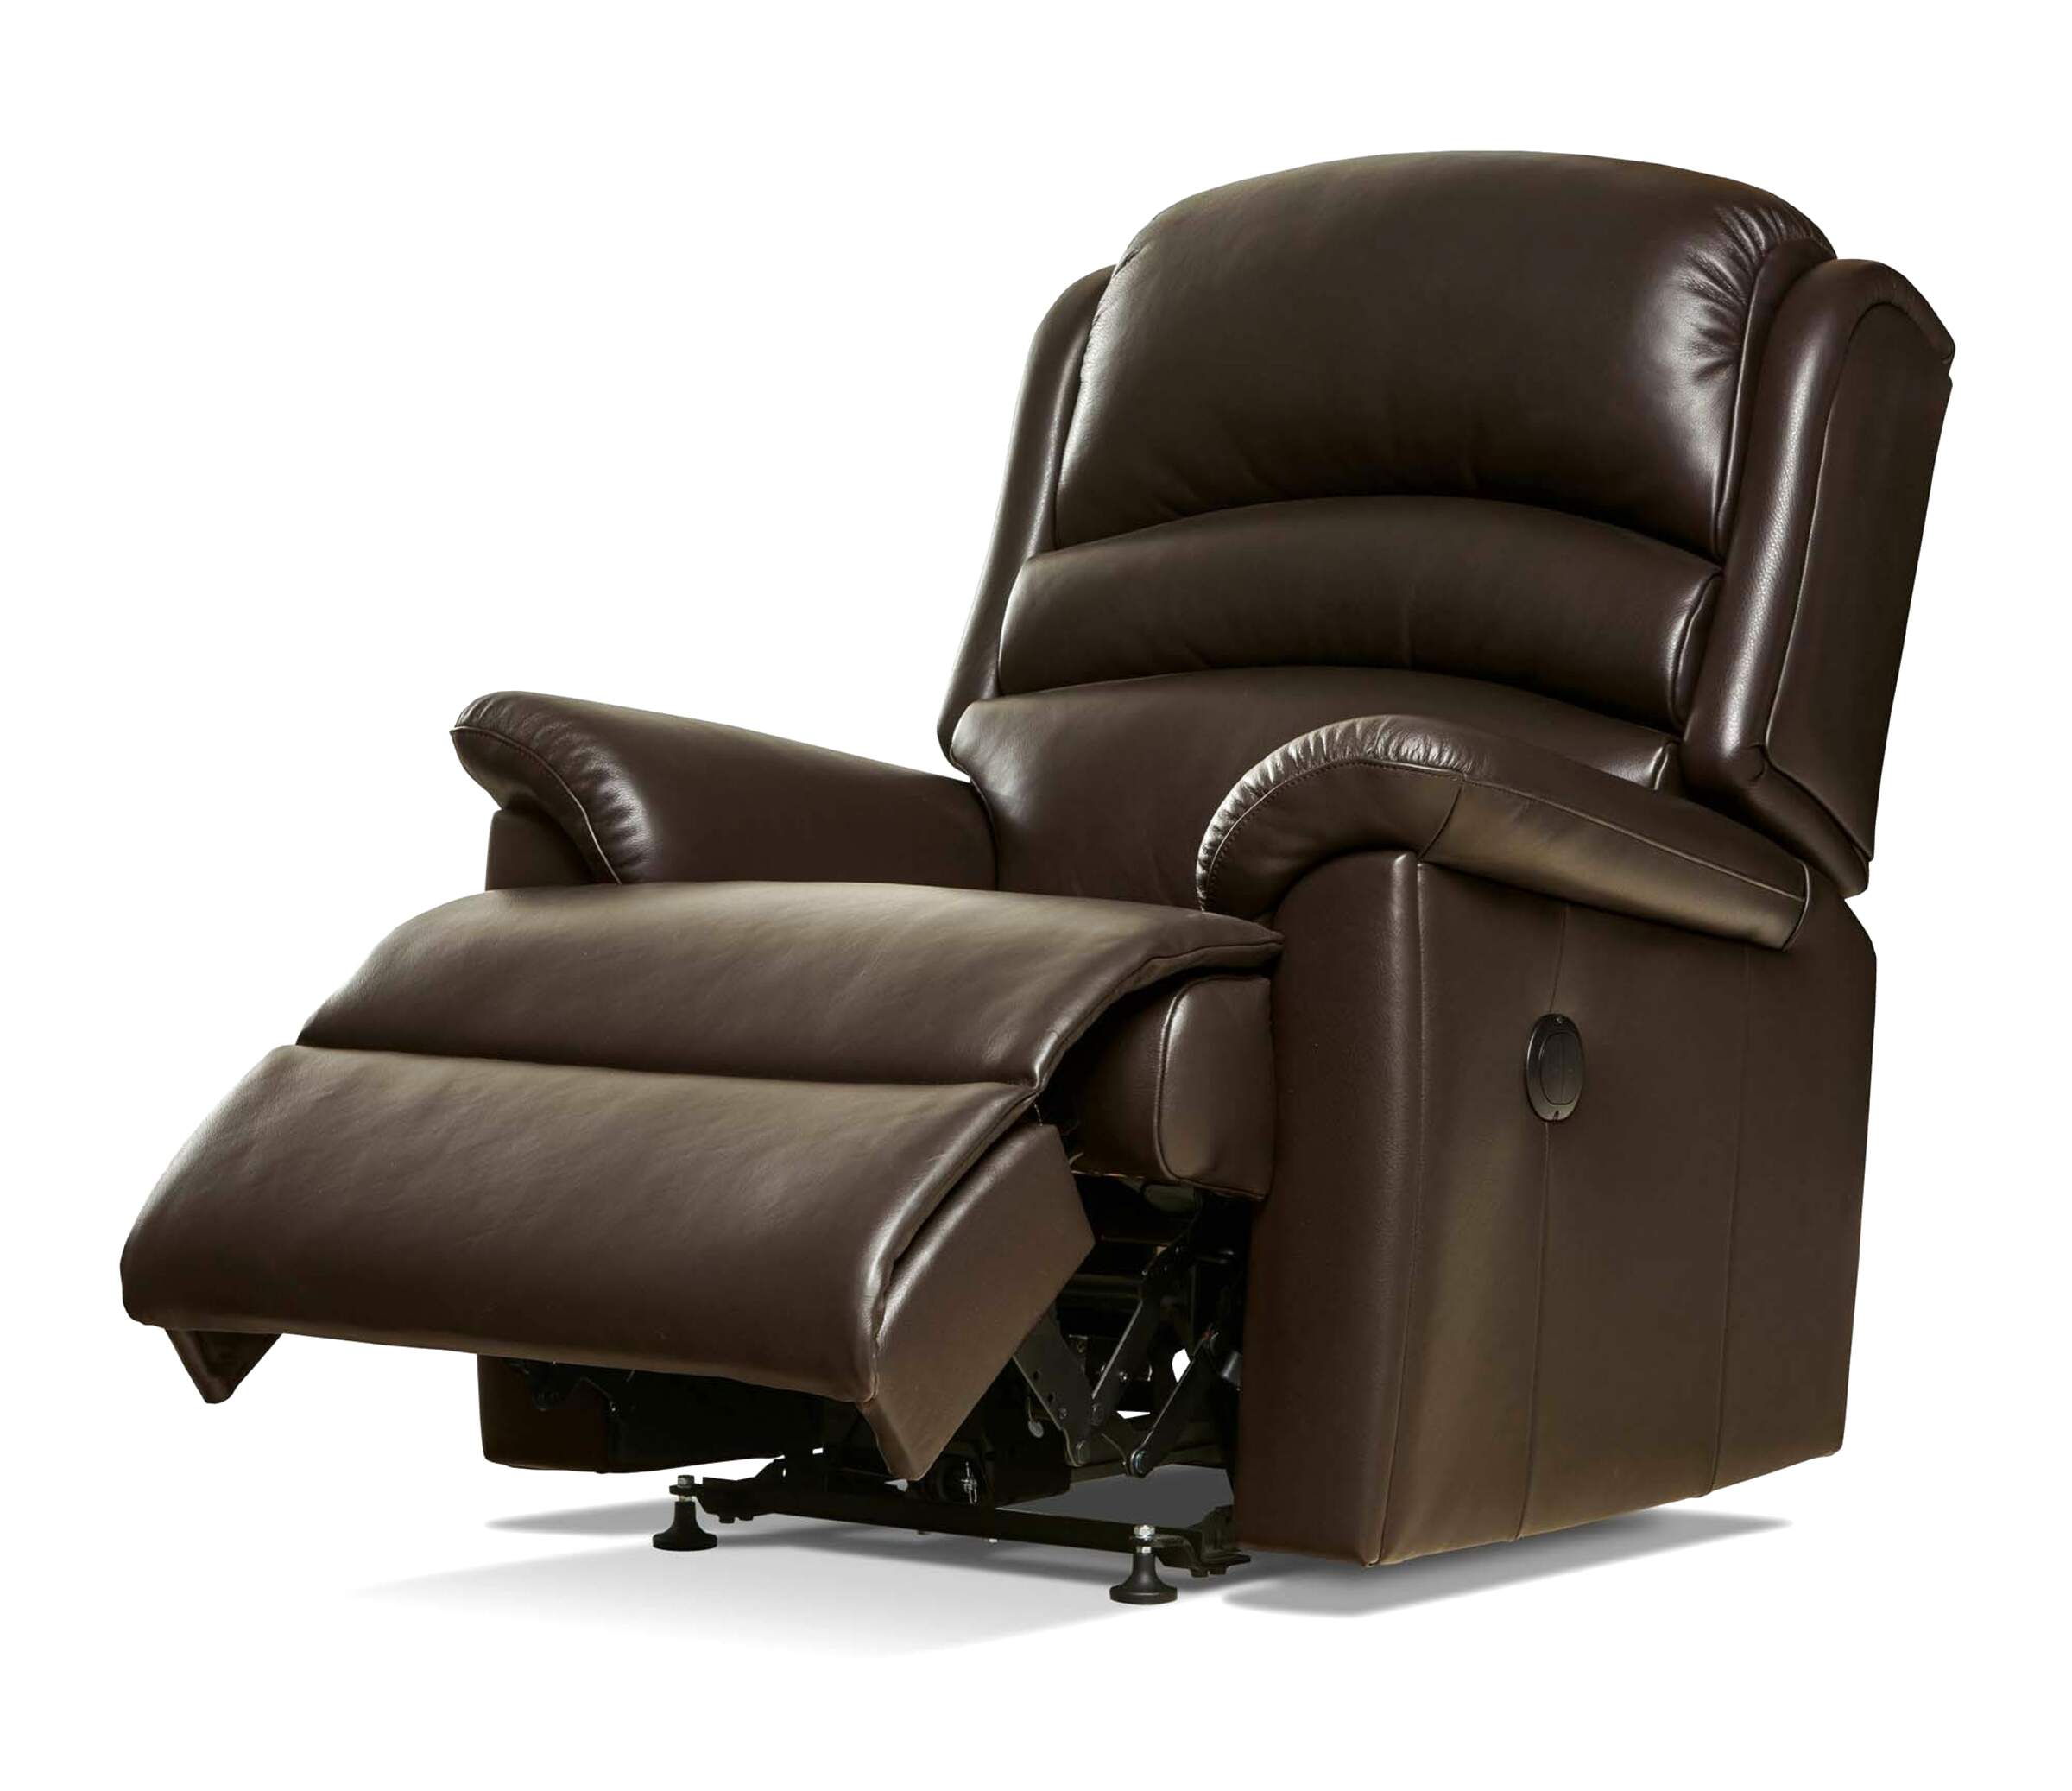 Recliner Chair for sale in UK | 96 used Recliner Chairs